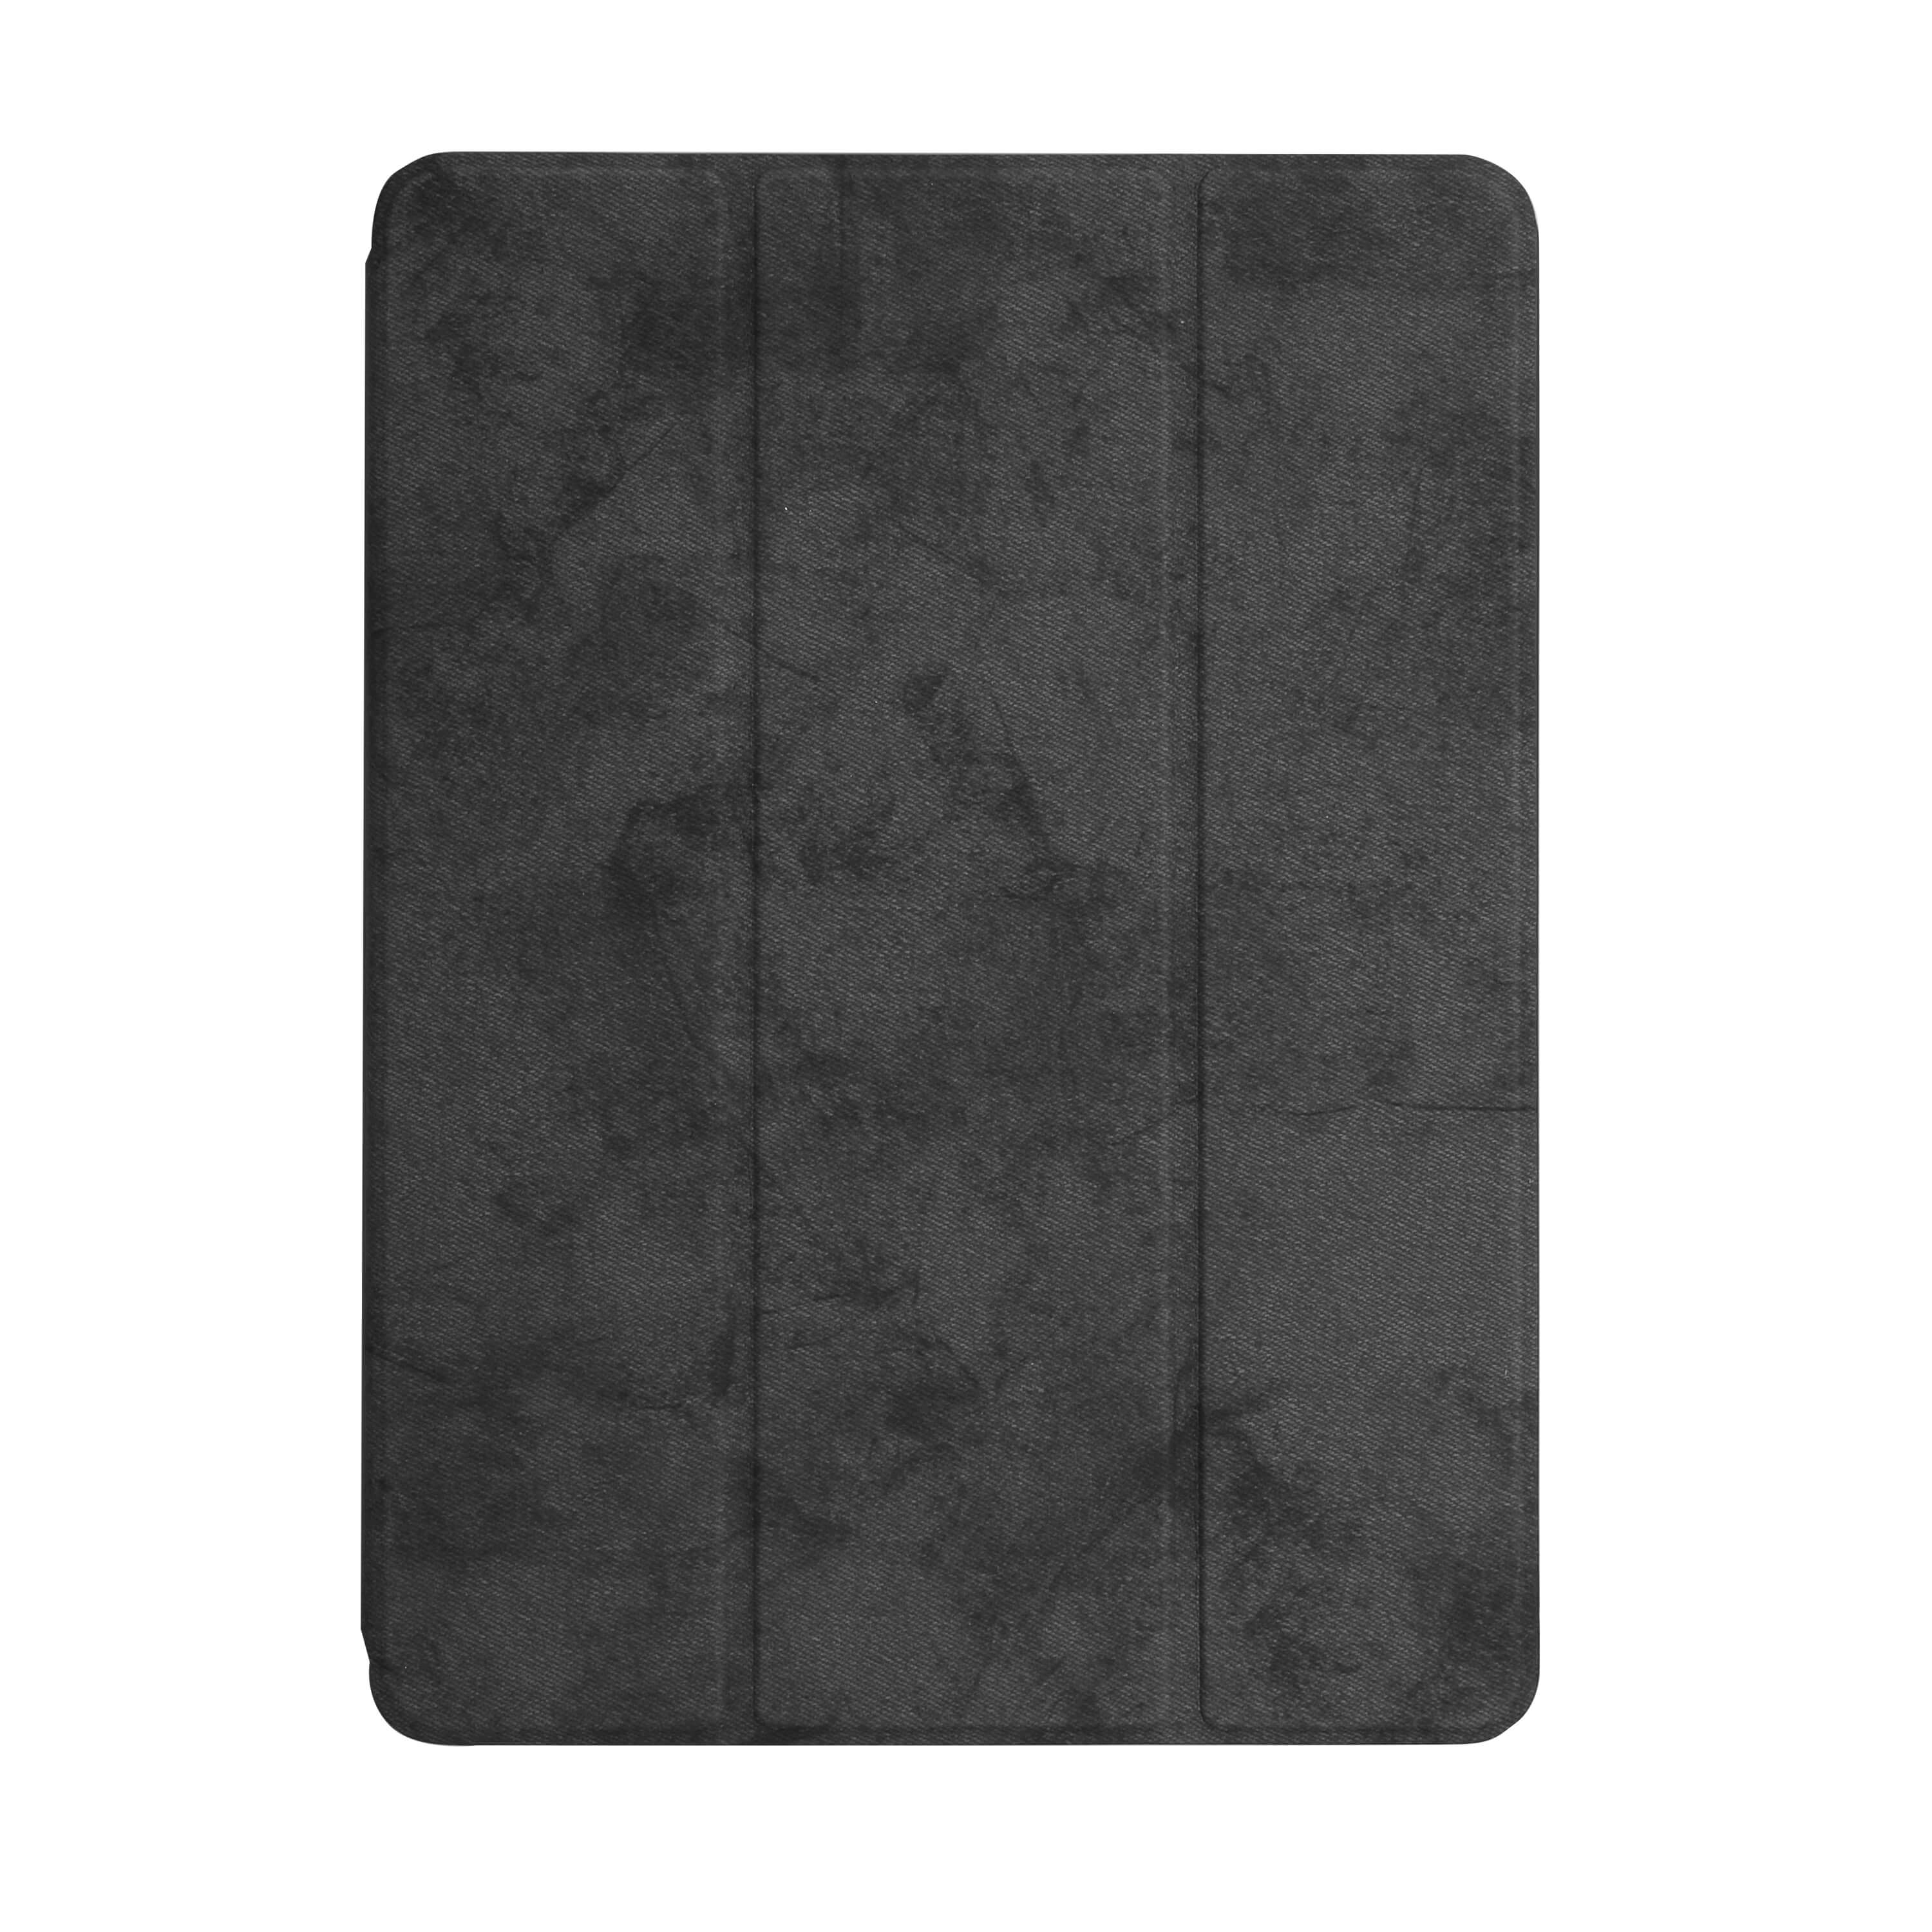 Tabletcover Grey iPad 2018 space for Apple Pencil